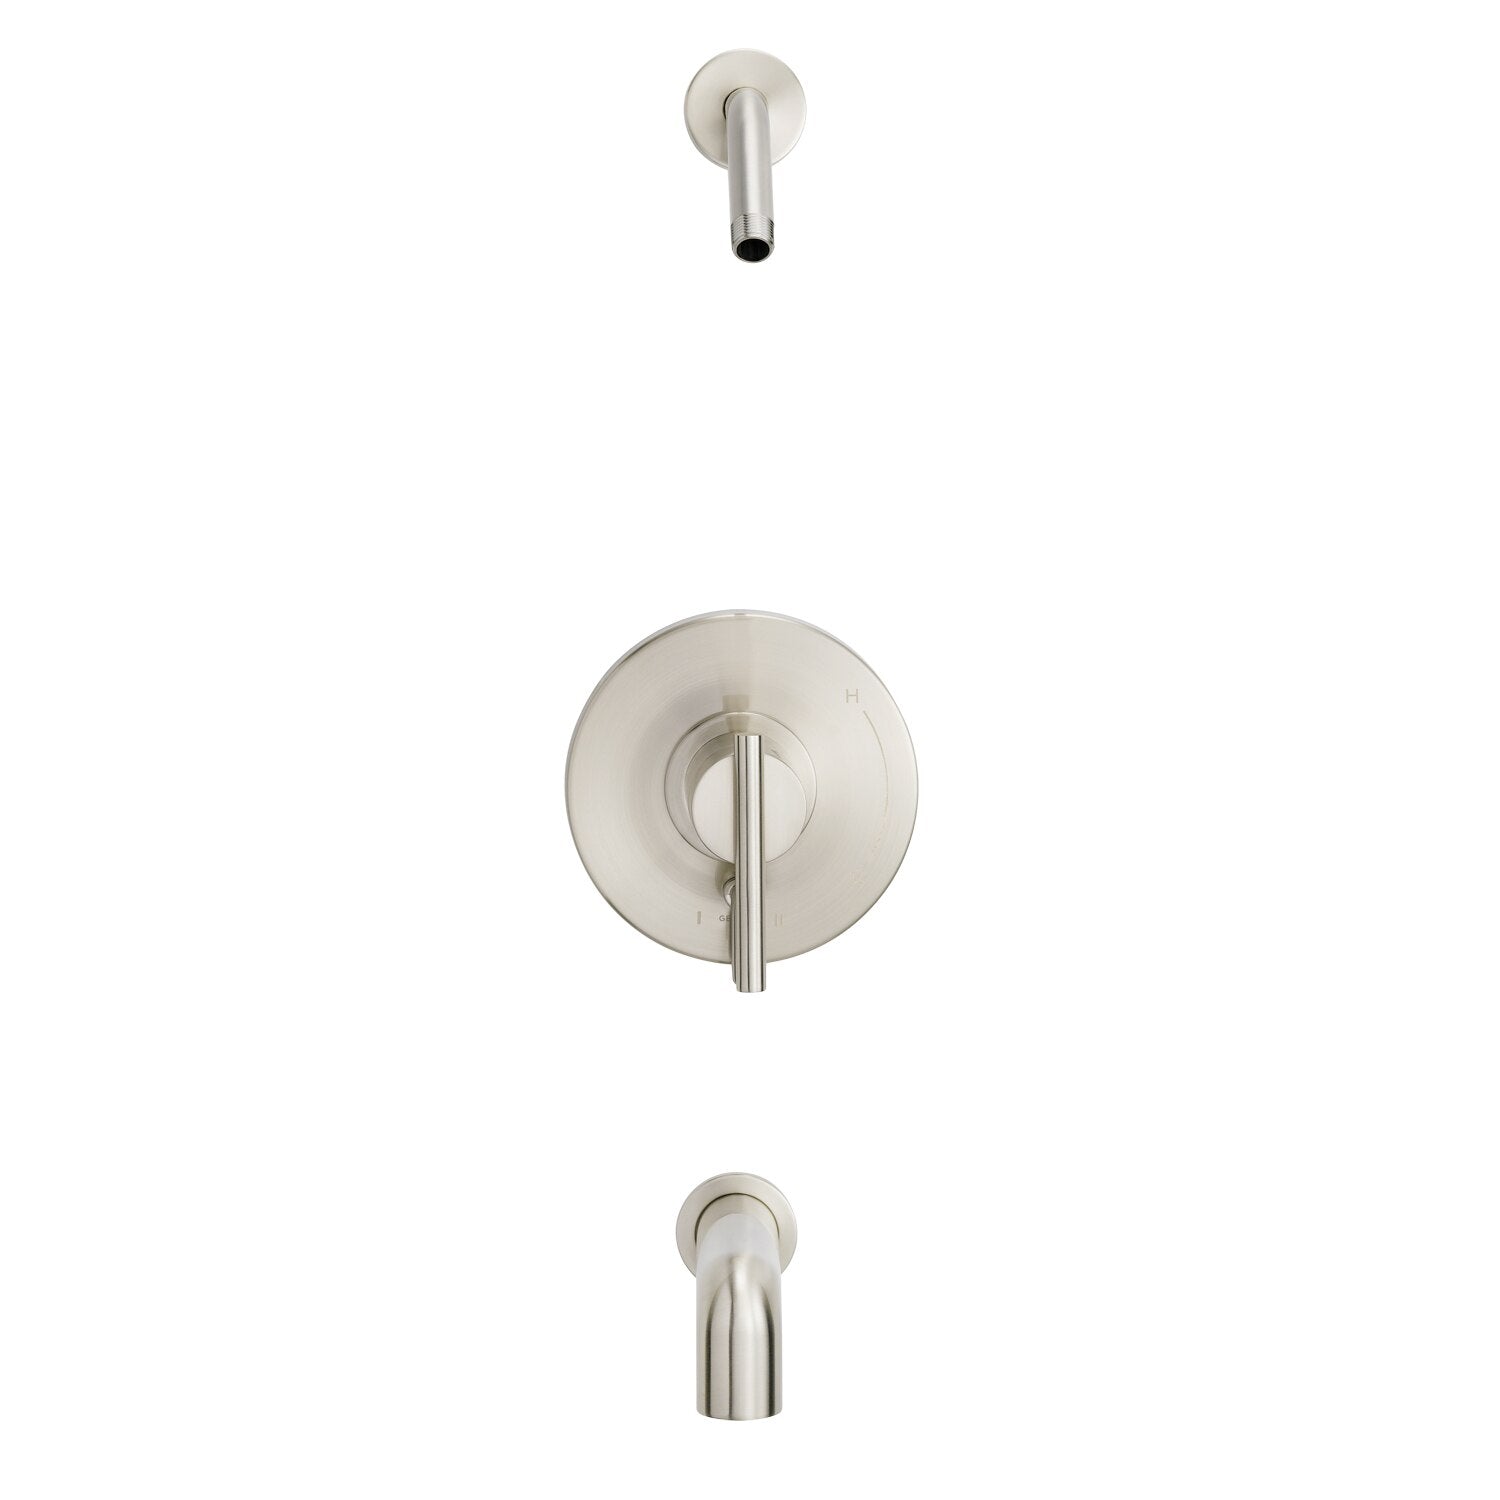 Danze by Gerber Parma 1H Tub and Shower Trim Kit and Treysta Cartridge w/ Diverter on Valve Less Showerhead